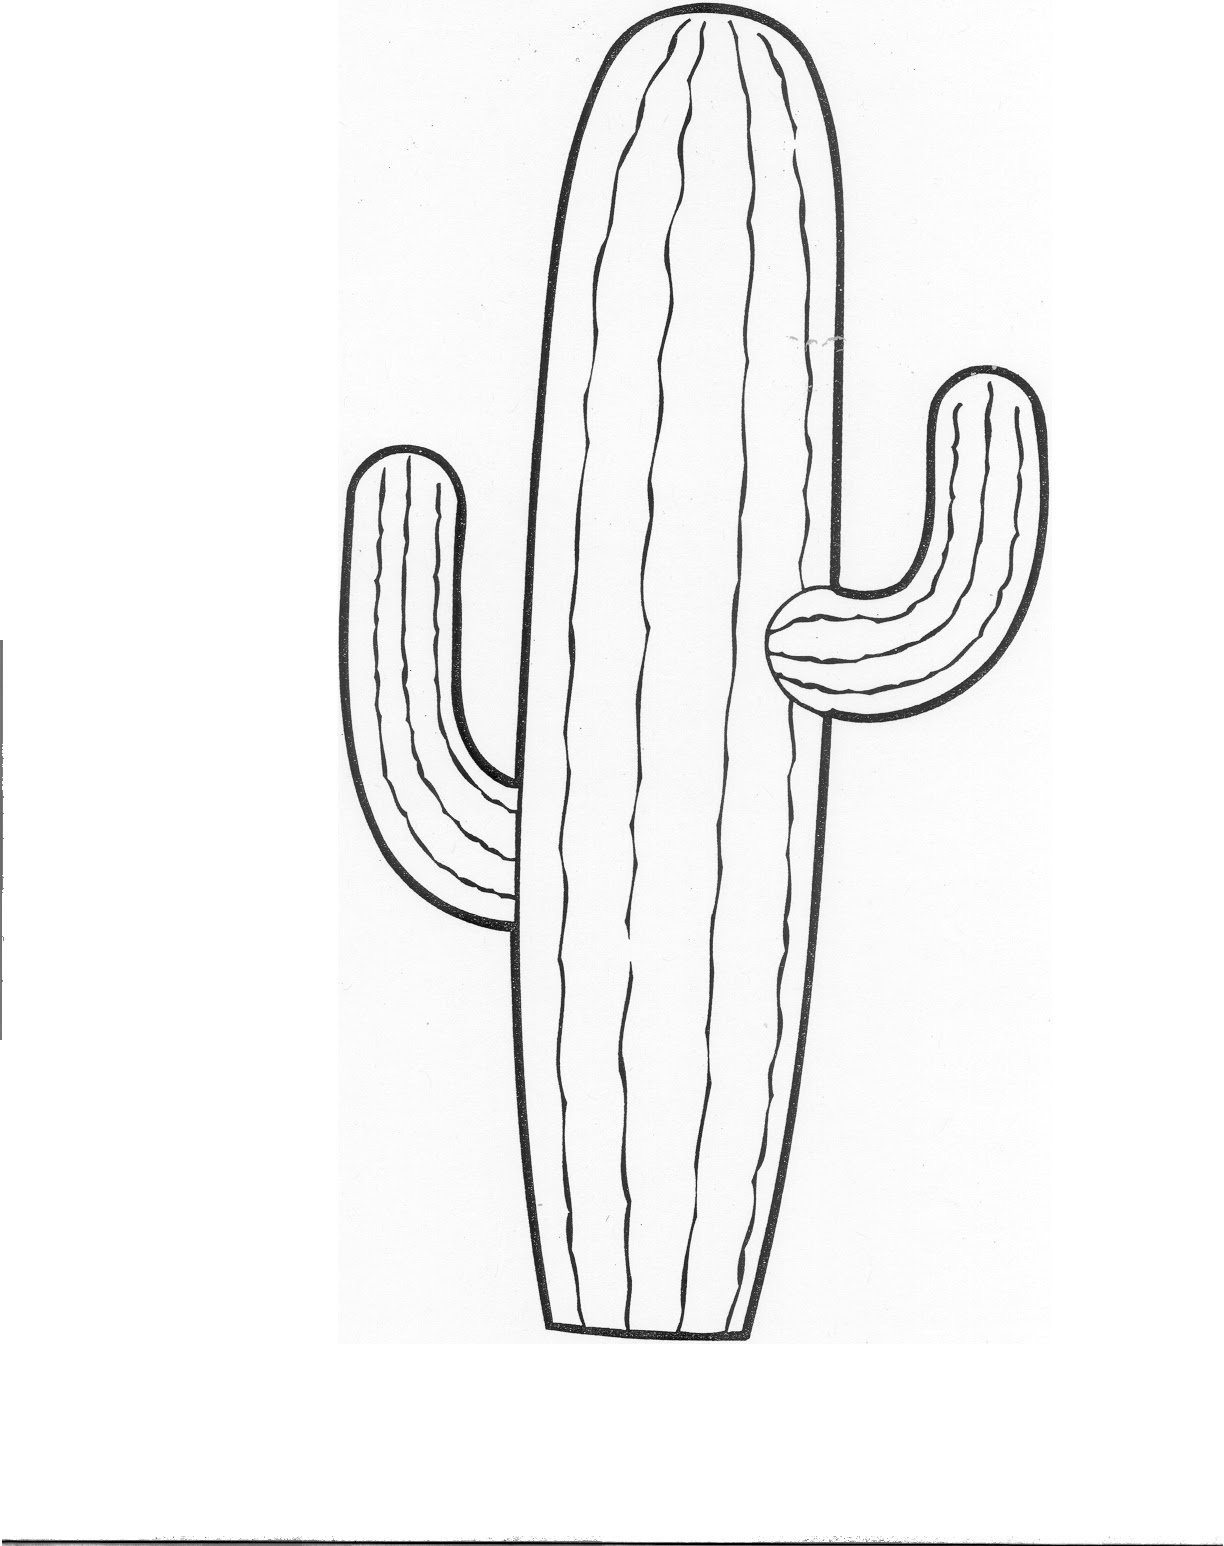 Download Cactus coloring pages and printables